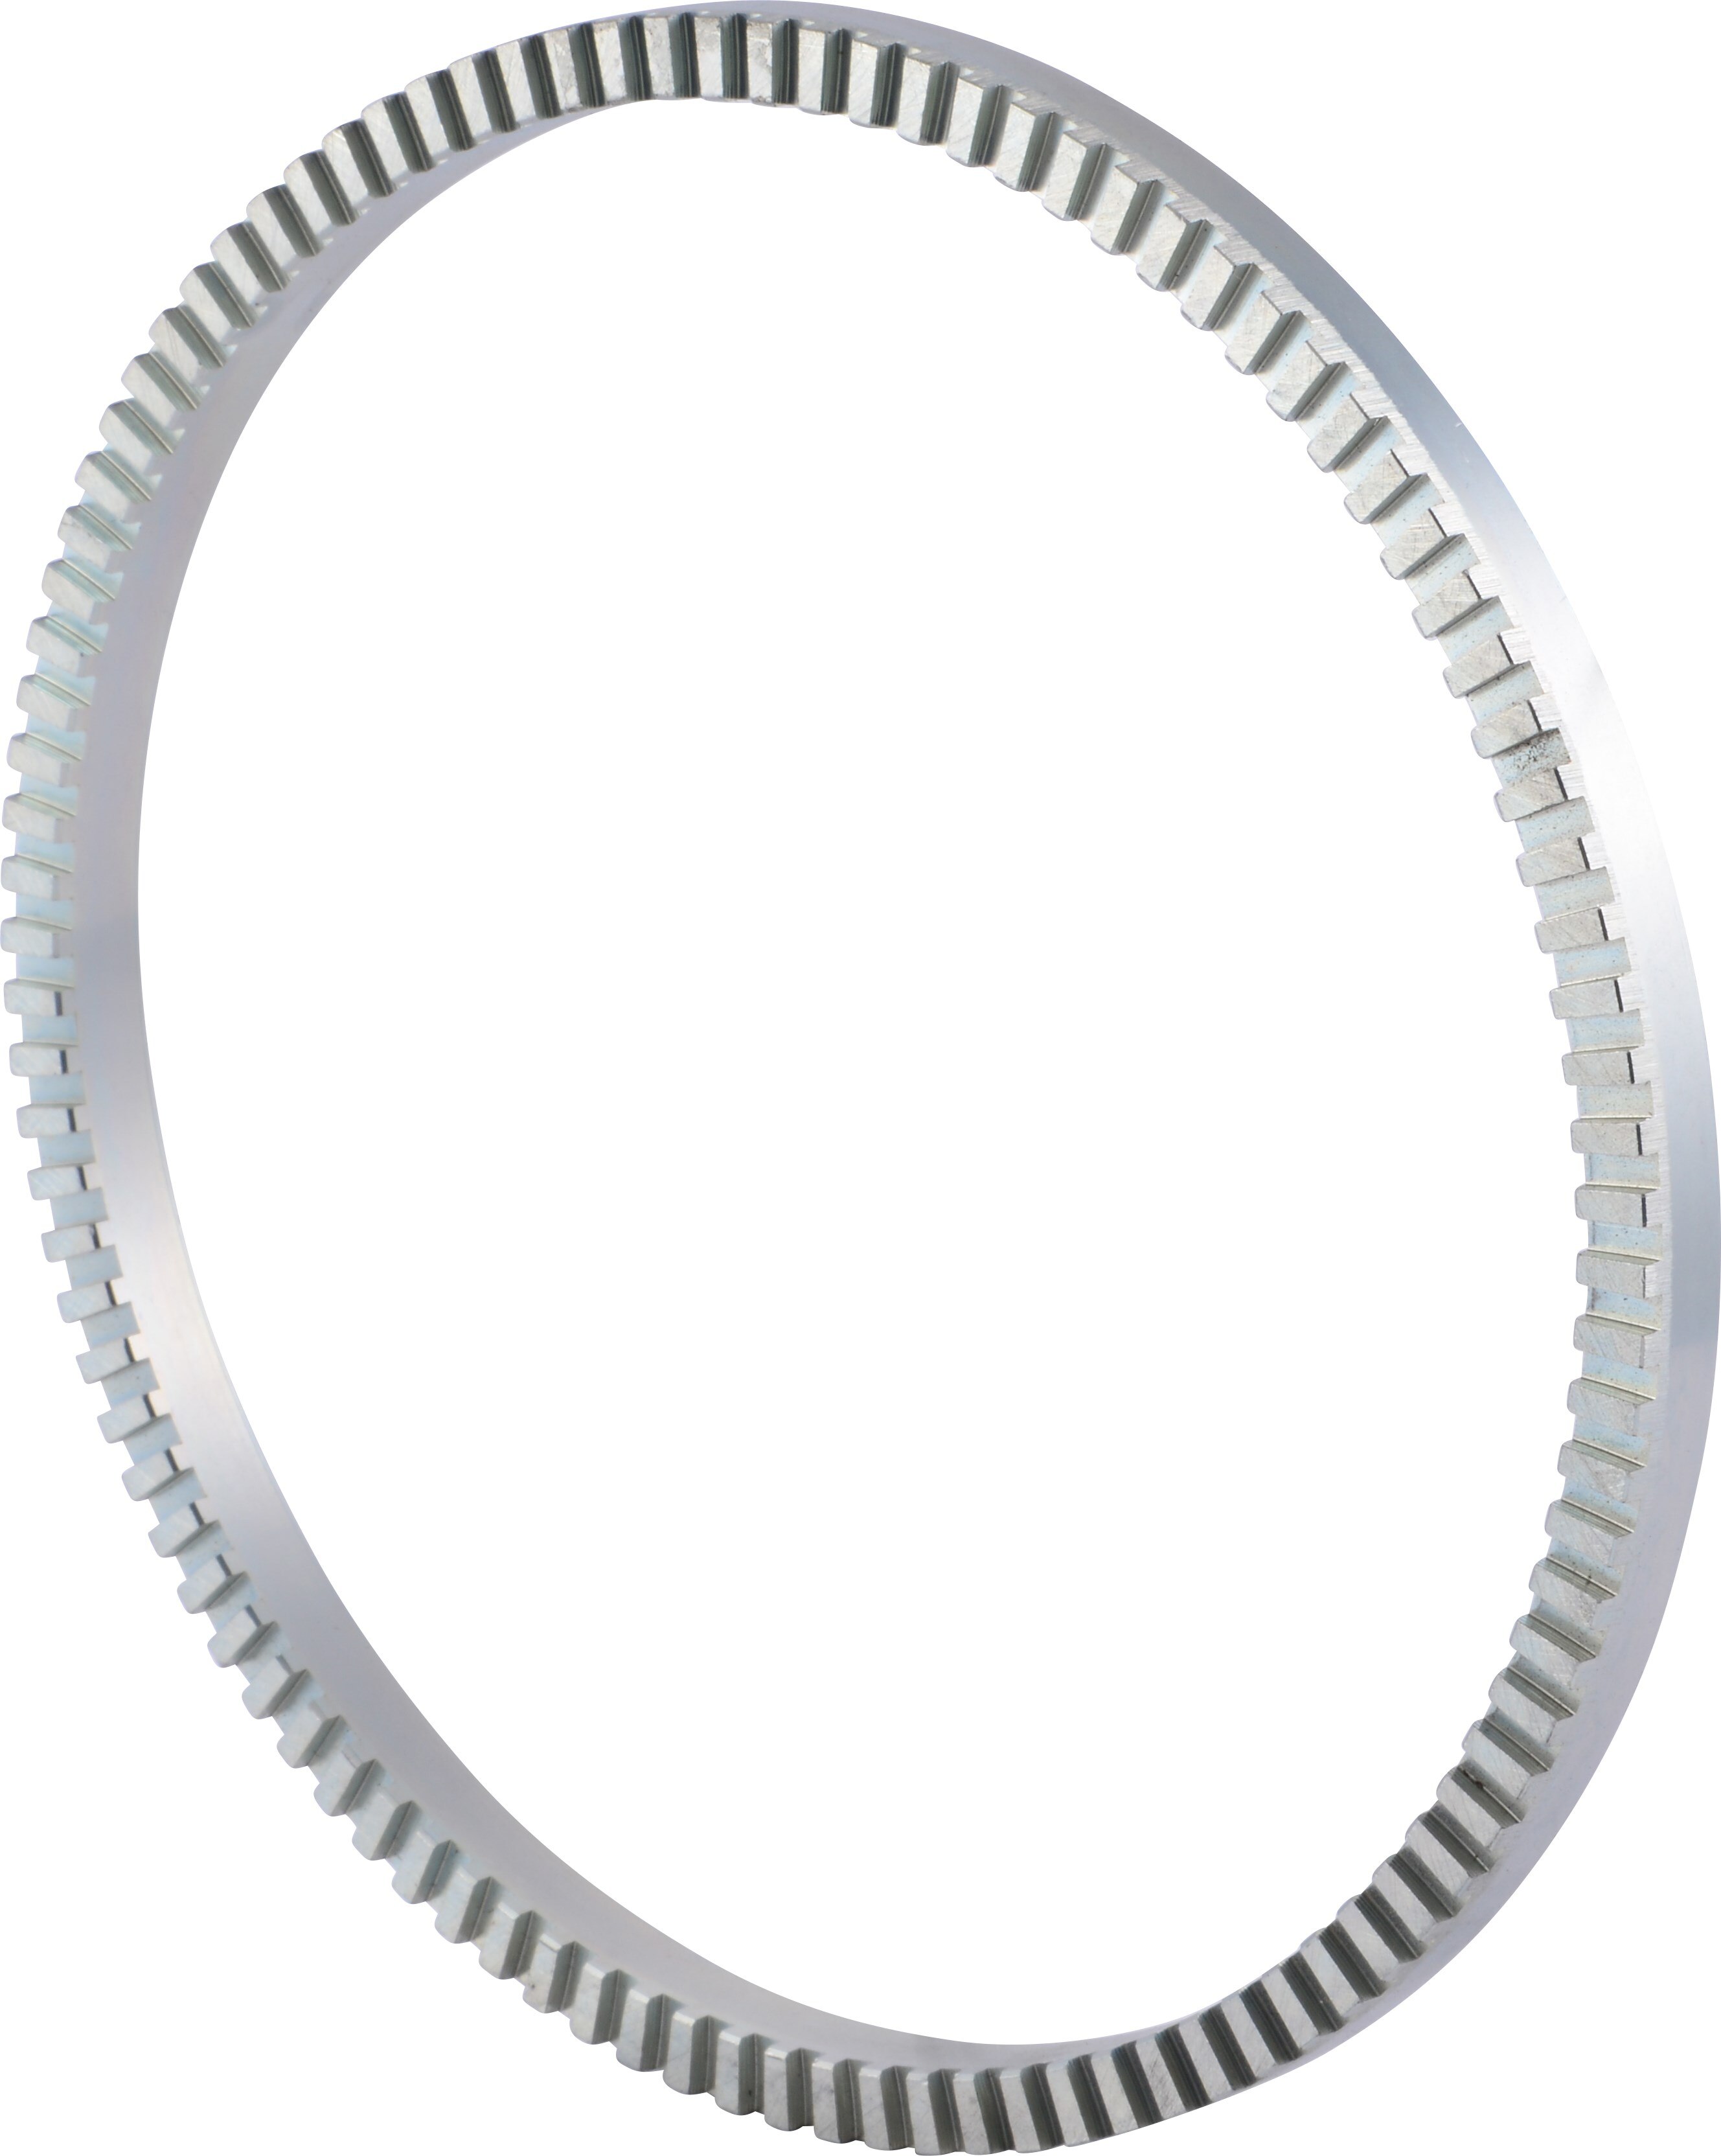 EXCITER RING,AXIAL,100TX6.99ID